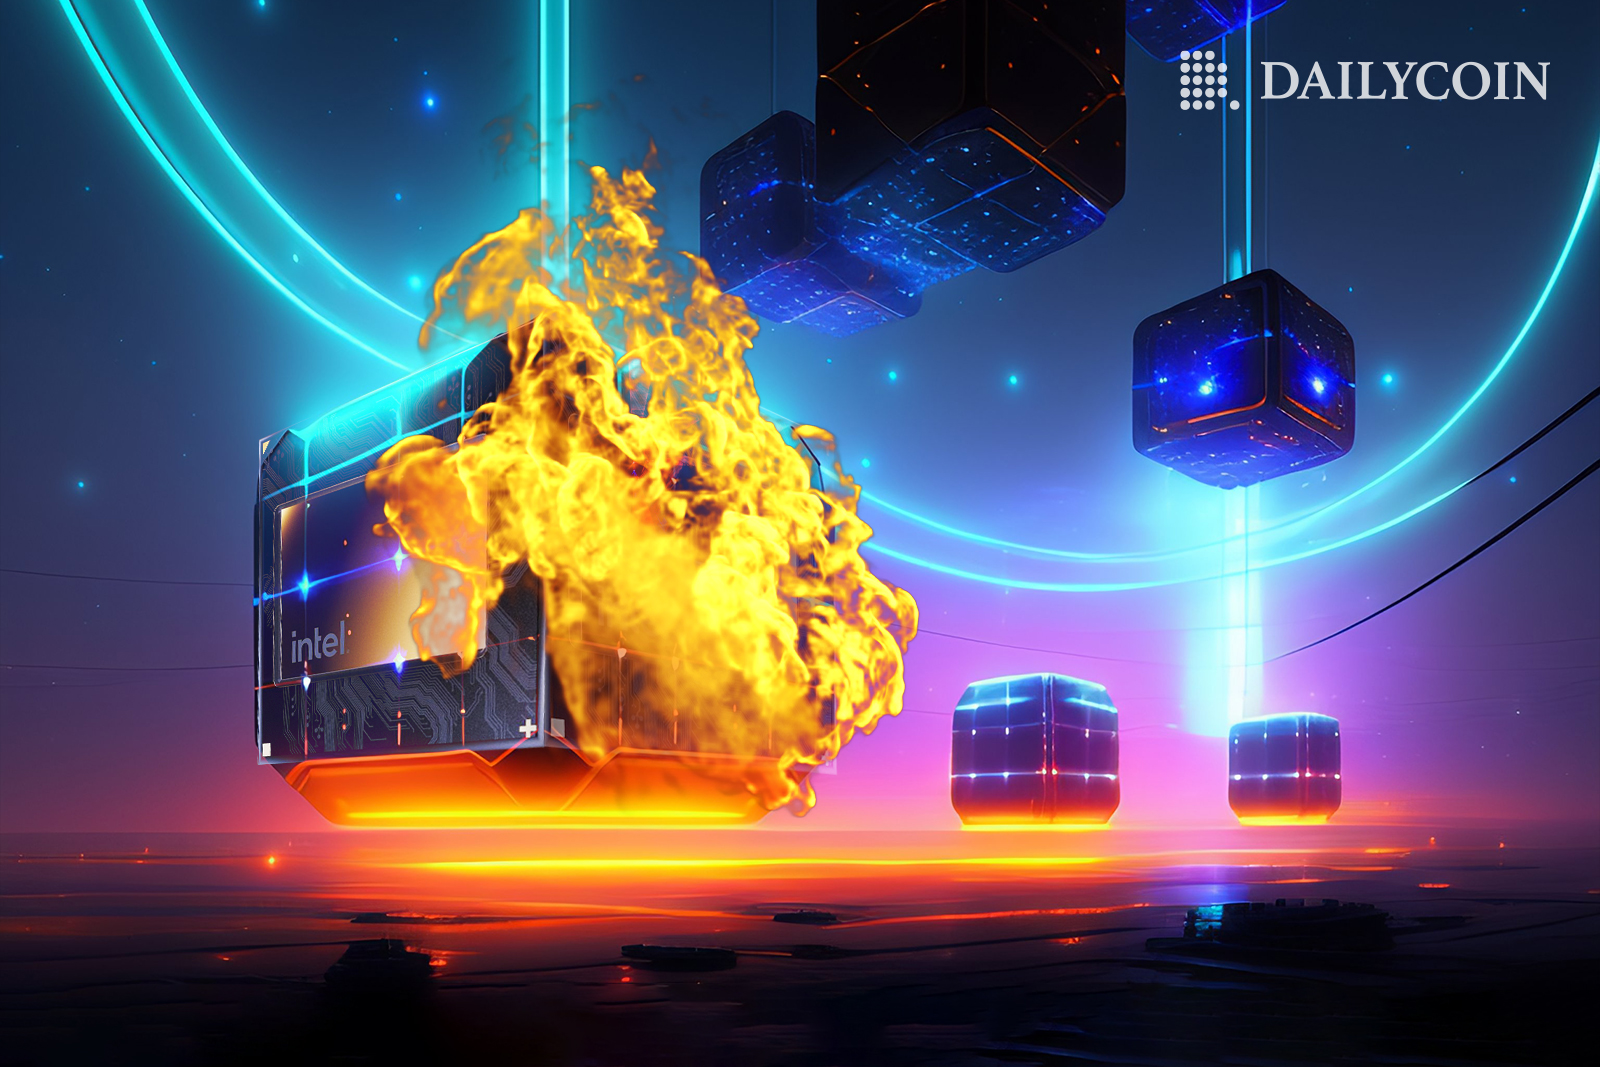 Blocks in space representing Intel's chips. One is on fire.